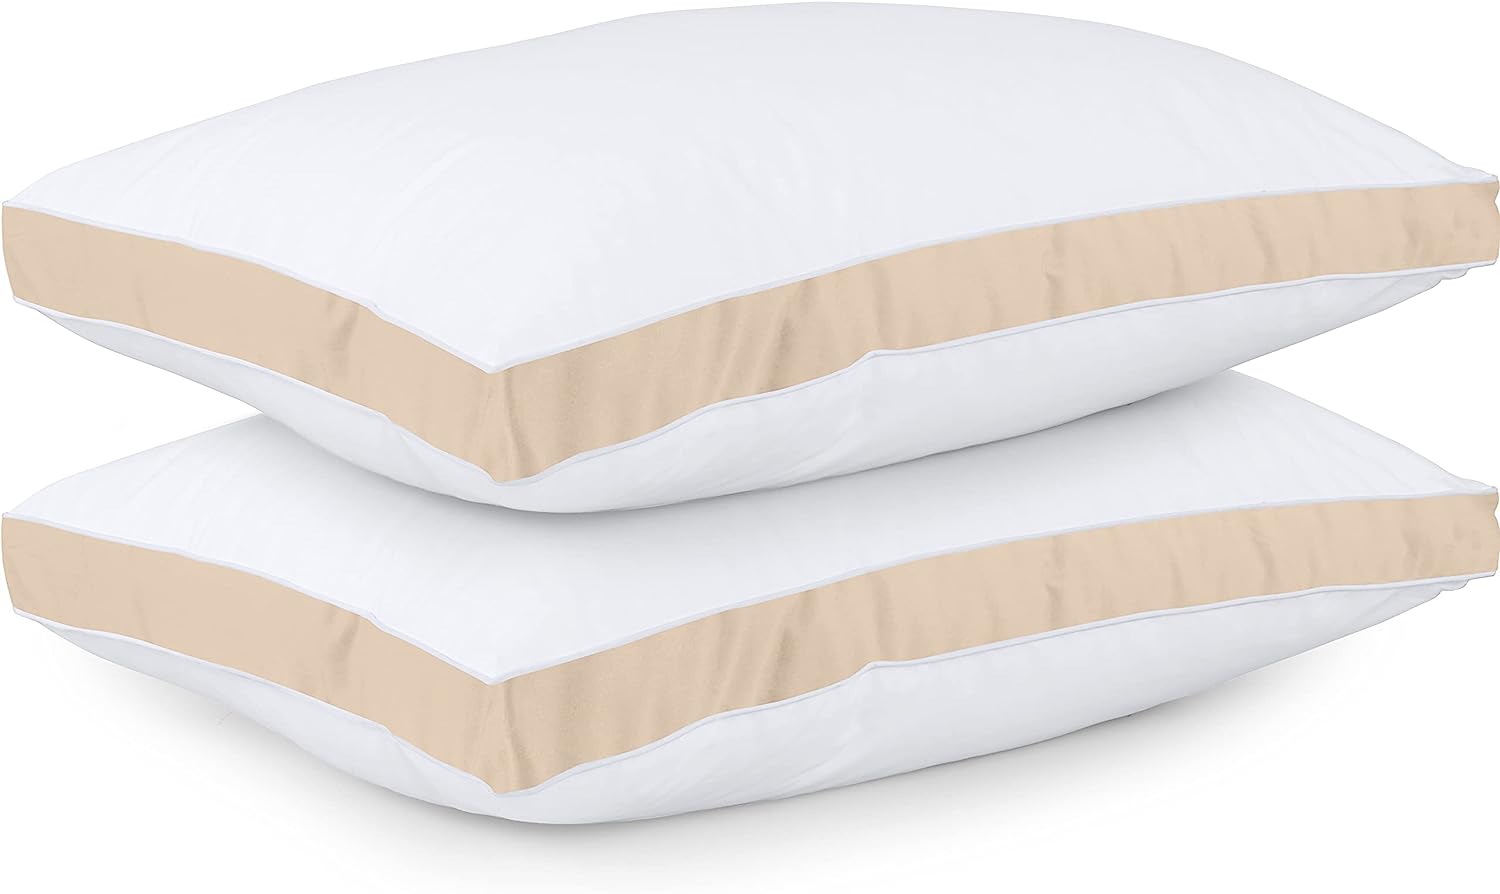 Utopia Bedding Gusseted Pillow (2-Pack) Premium Quality Bed Pillows - Side  Back